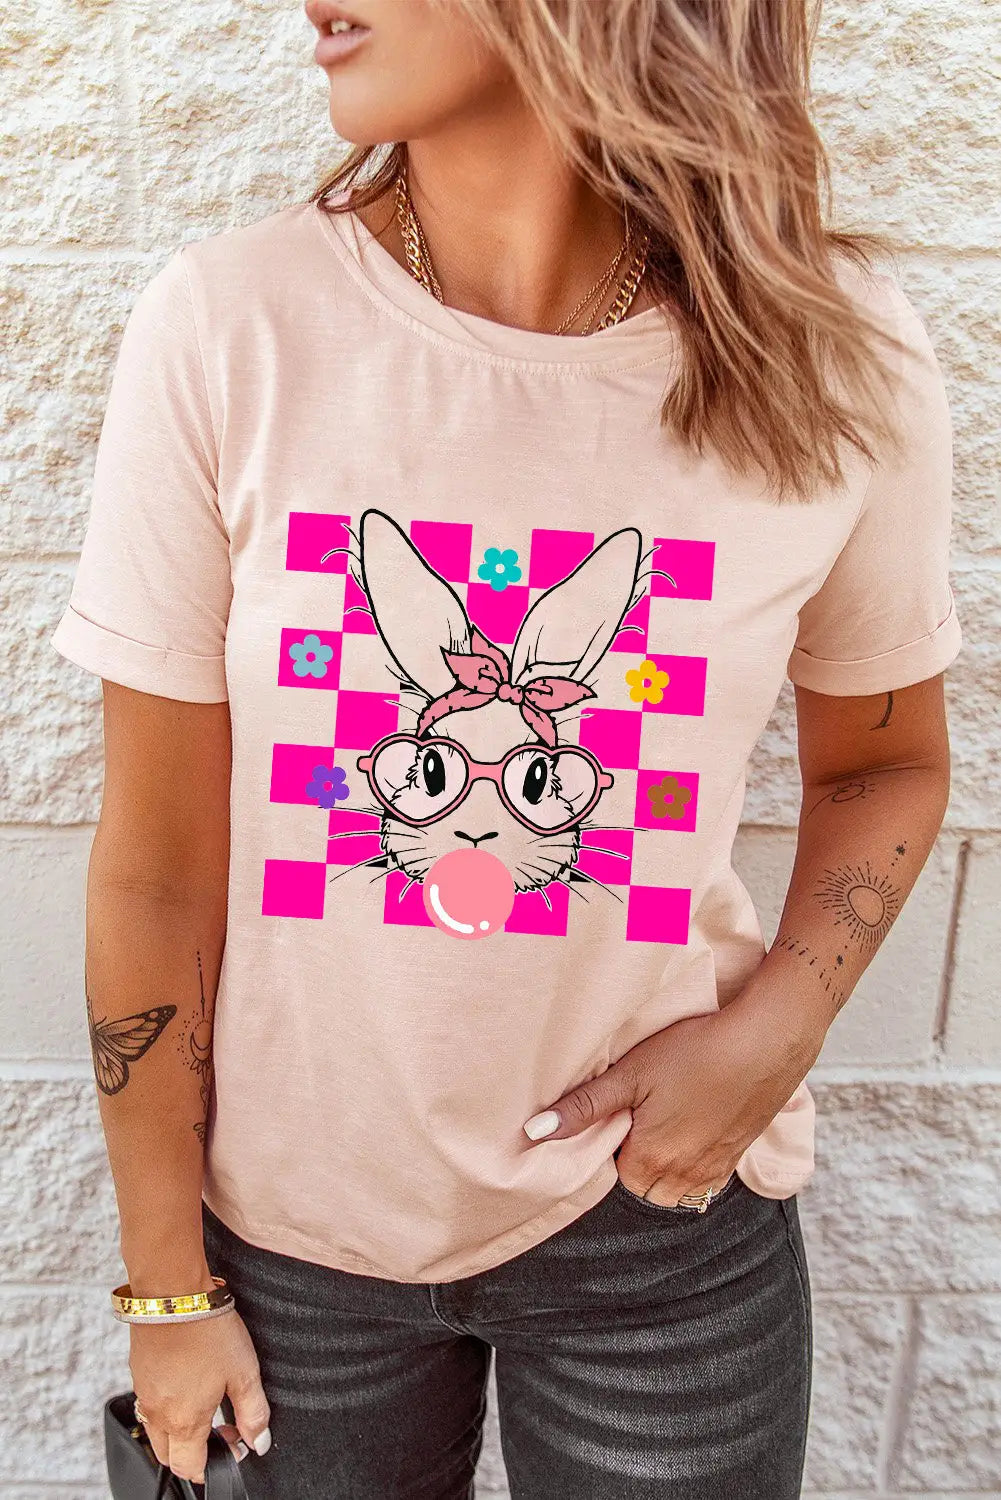 Pink easter rabbit checkered flower print o-neck t shirt - s / 62% polyester + 32% cotton + 6% elastane - graphic